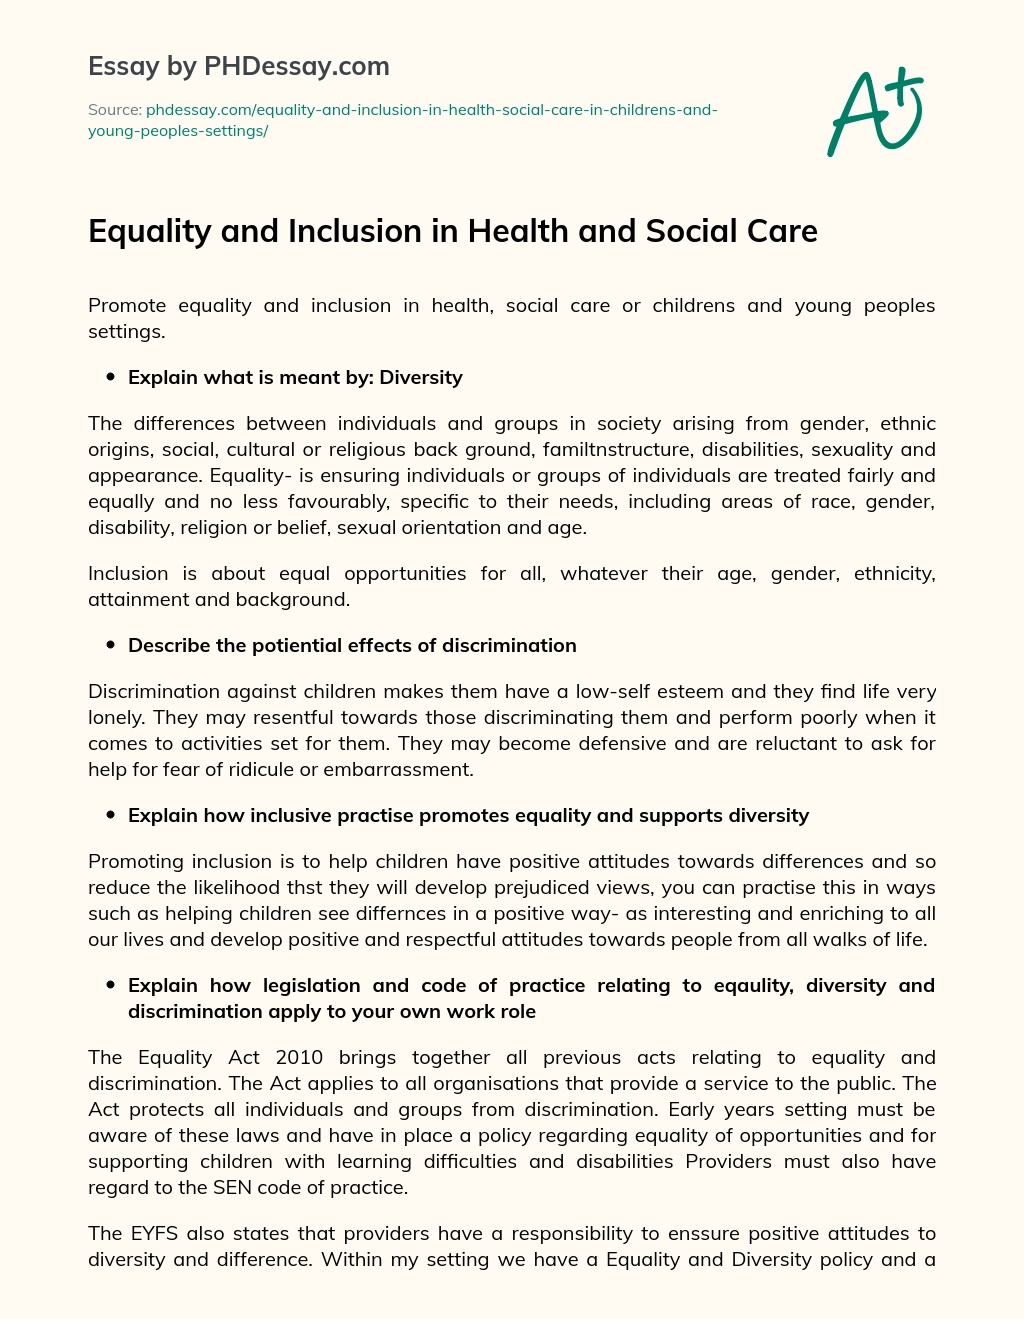 Equality and Inclusion in Health and Social Care essay